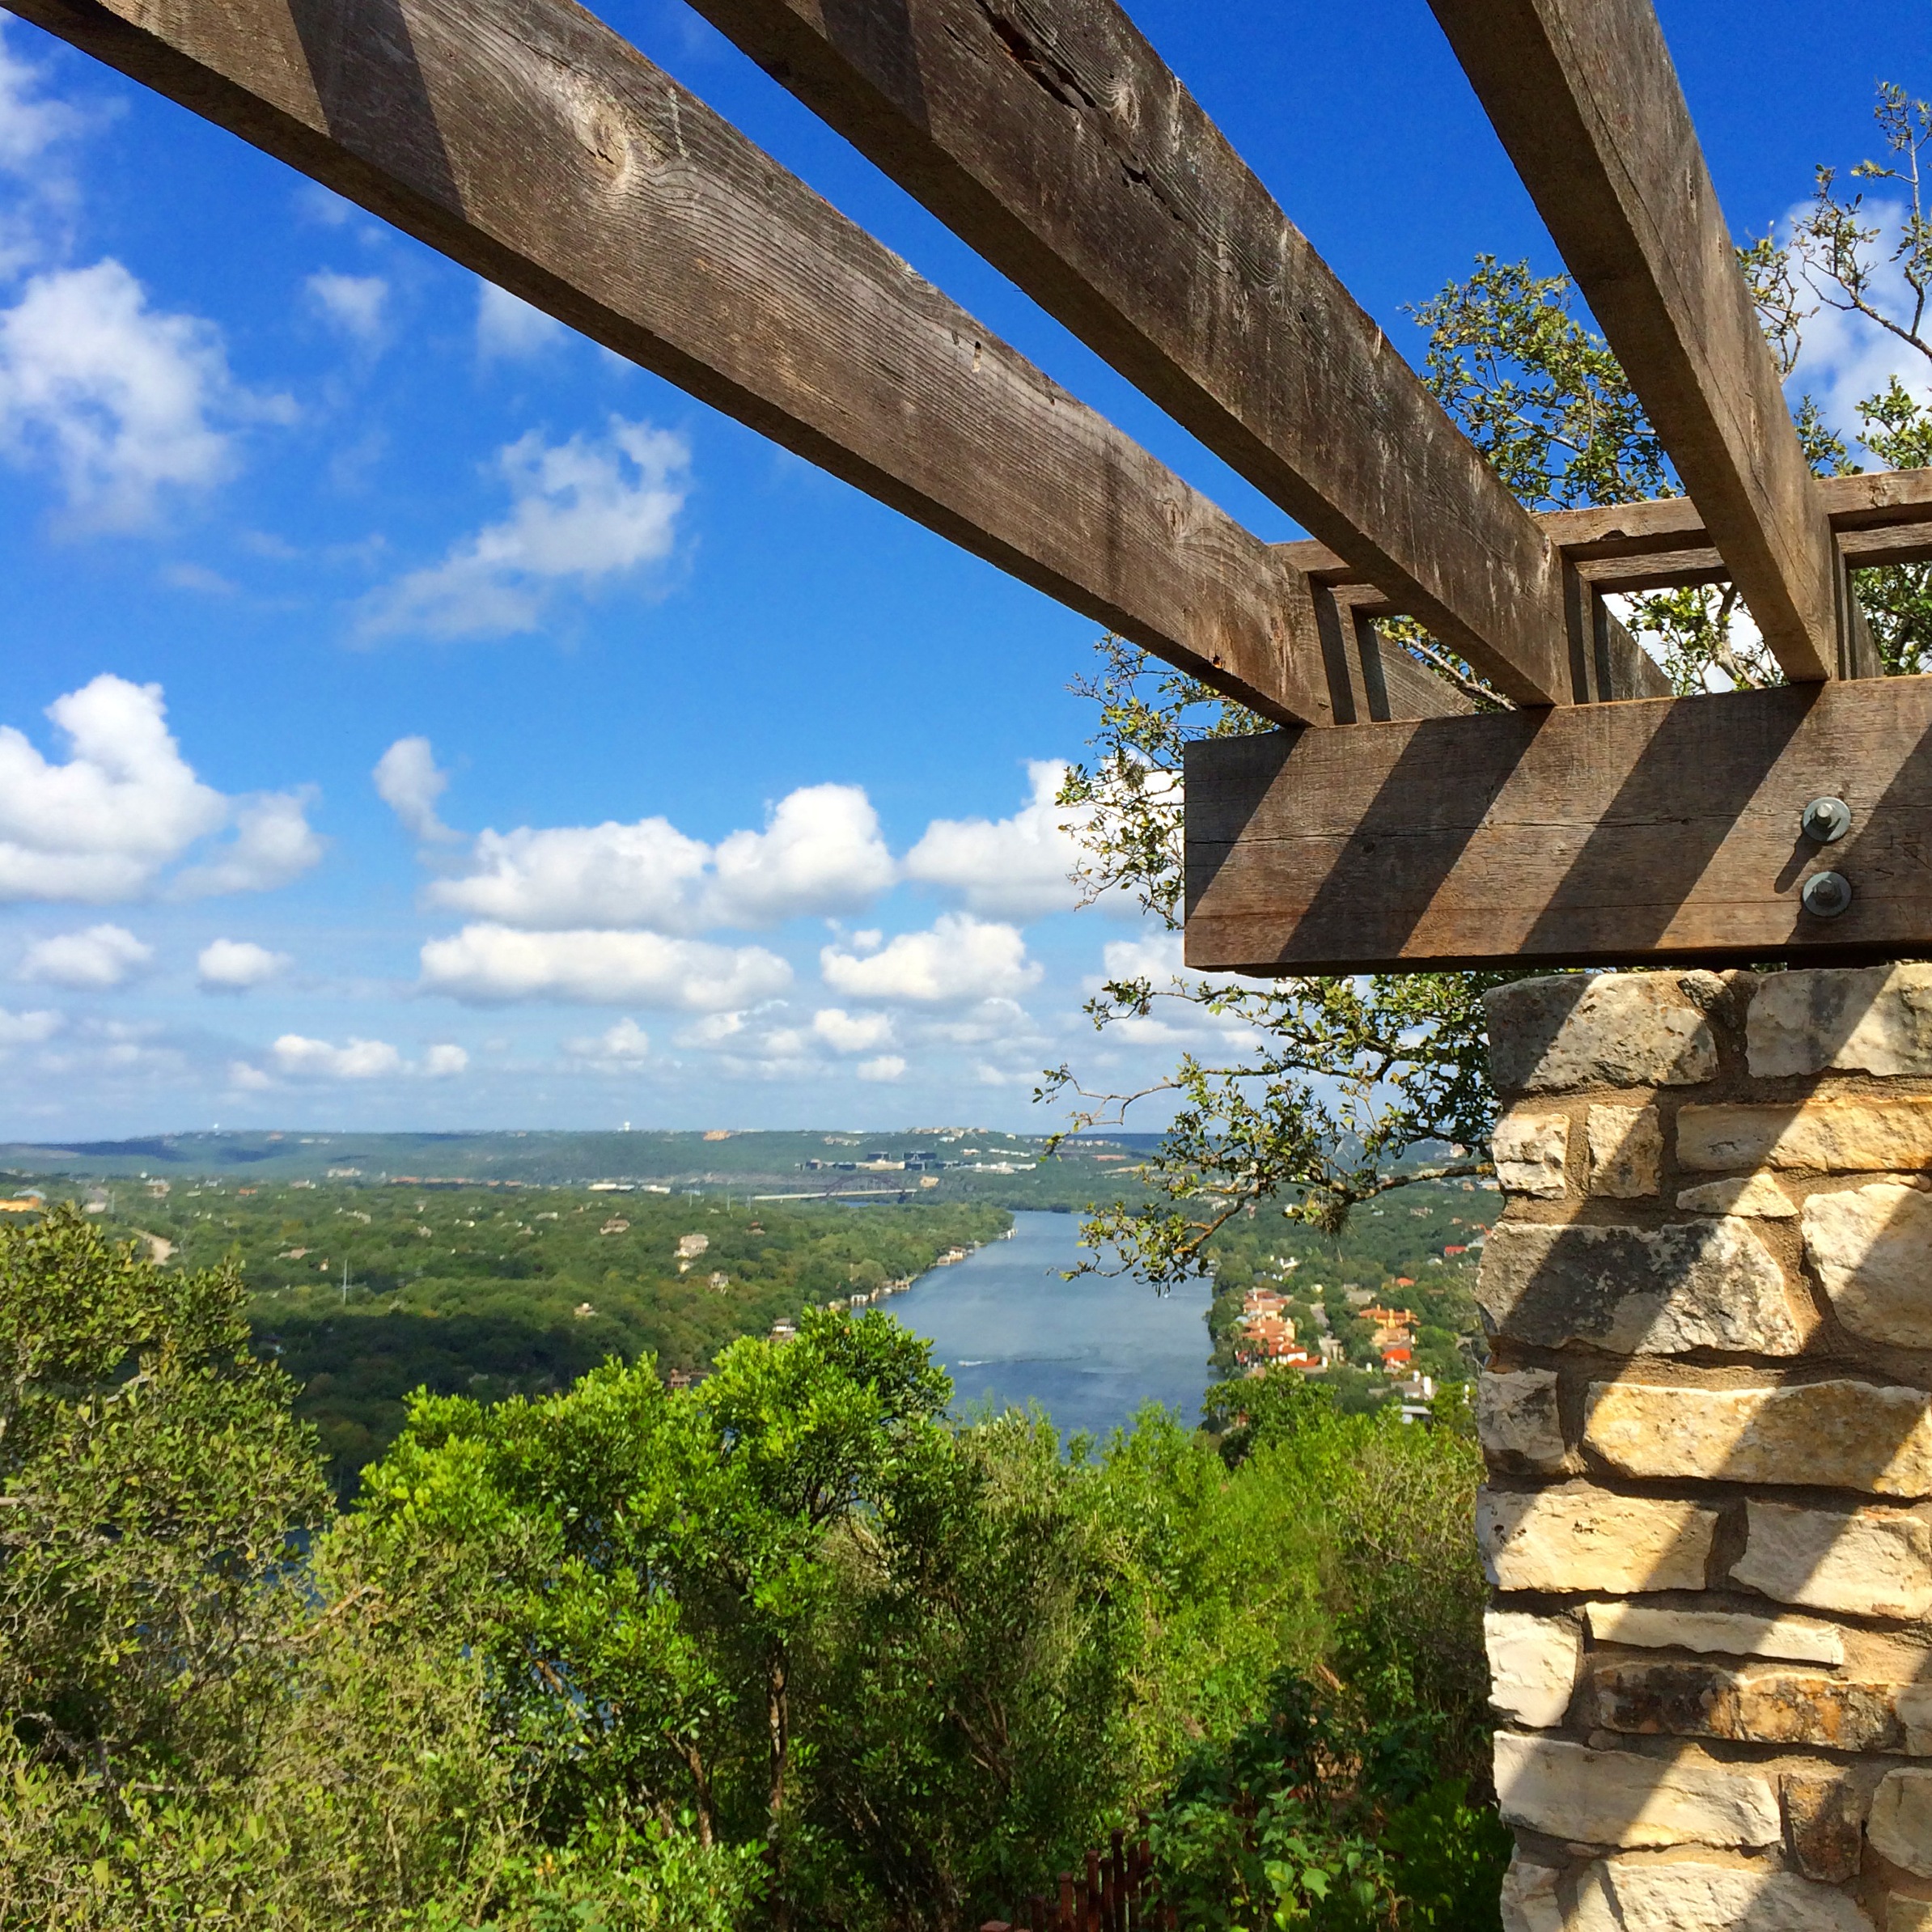 View of Austin, Texas from Mt. Bonnell